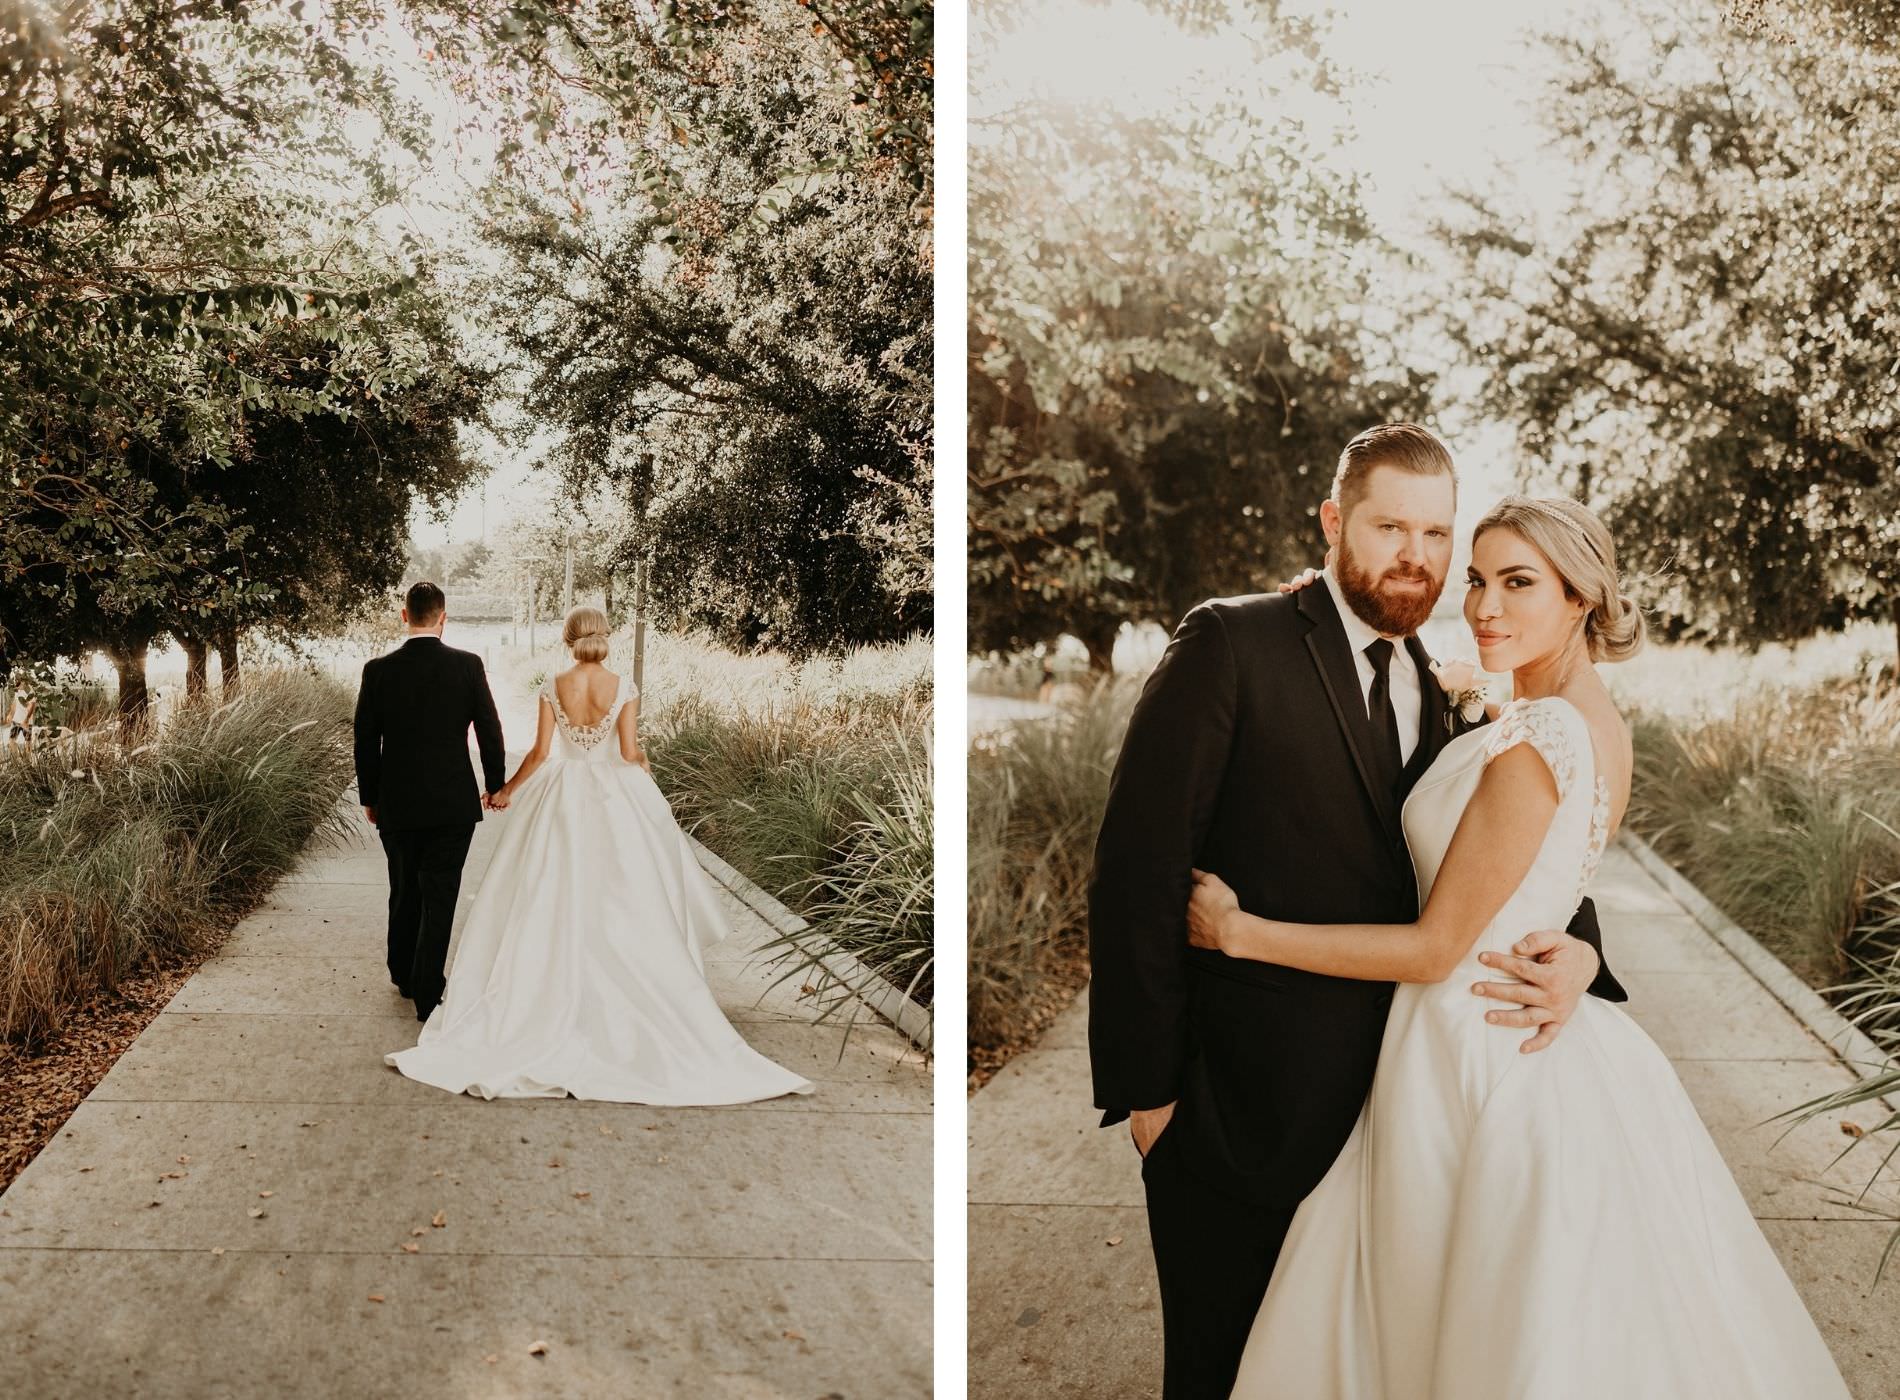 Outdoor Bride and Groom Portrait with Tree Lined Sidewalk | V Neck Low Back Mikado Satin and Lace Ballgown Wedding Dress by Anomalie | Groom wearing Classic Black Suit Tux